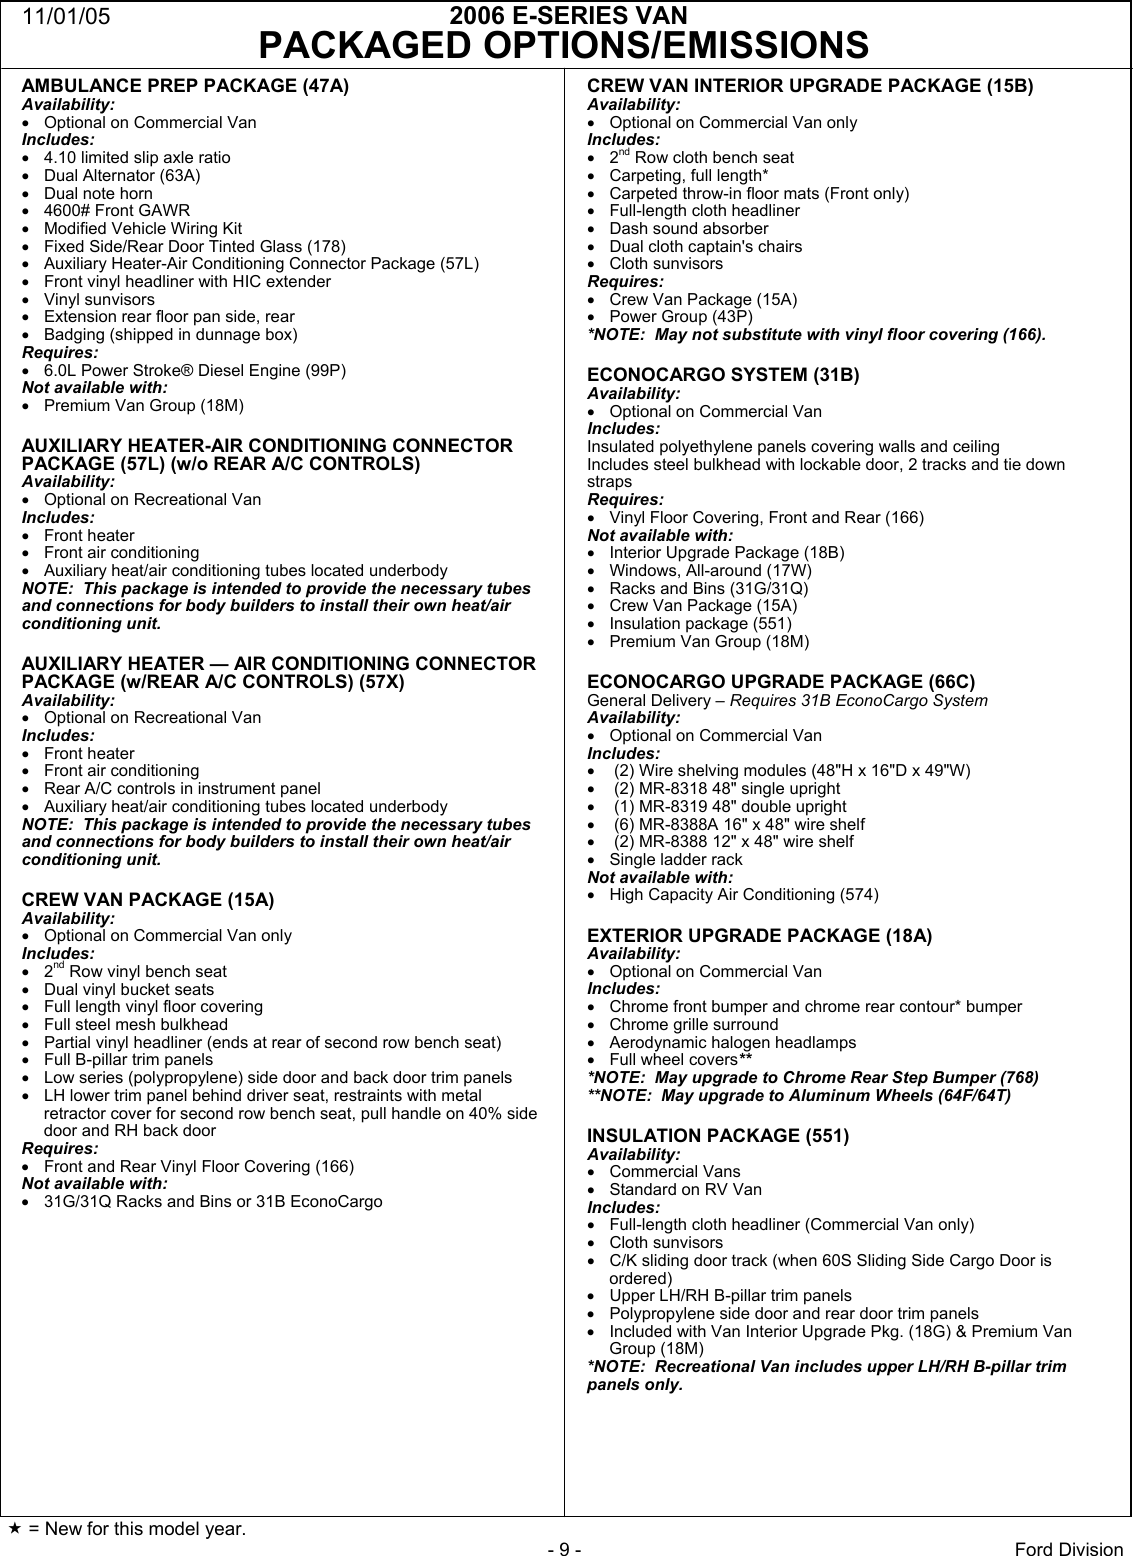 Page 9 of 12 - Ford Ford-2006-E-Series-Specification-Sheet 68xE-Series VanCom